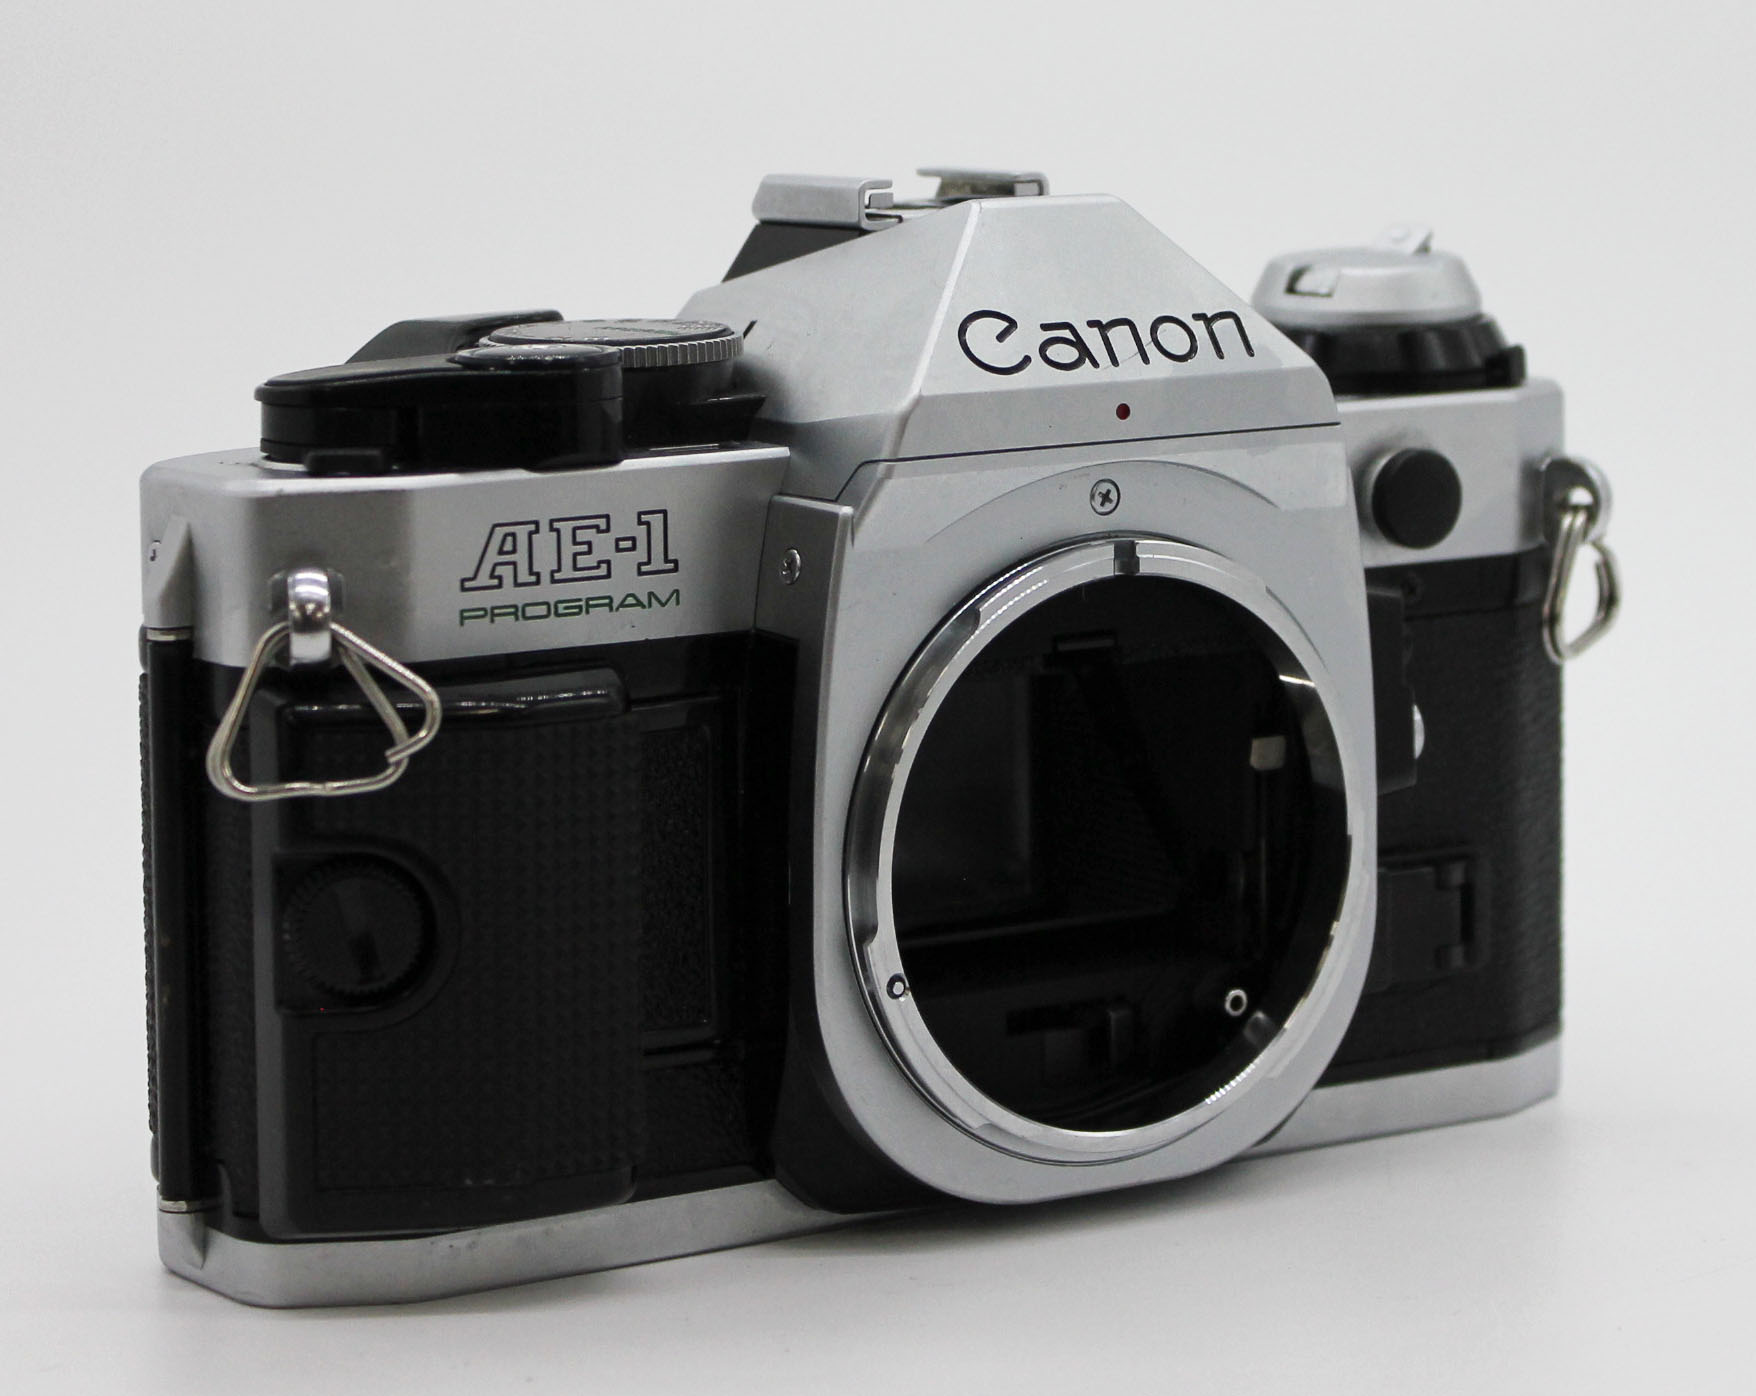 Canon AE-1 Program 35mm SLR Film Camera with New FD NFD 50mm F/1.4 Lens from Japan Photo 2